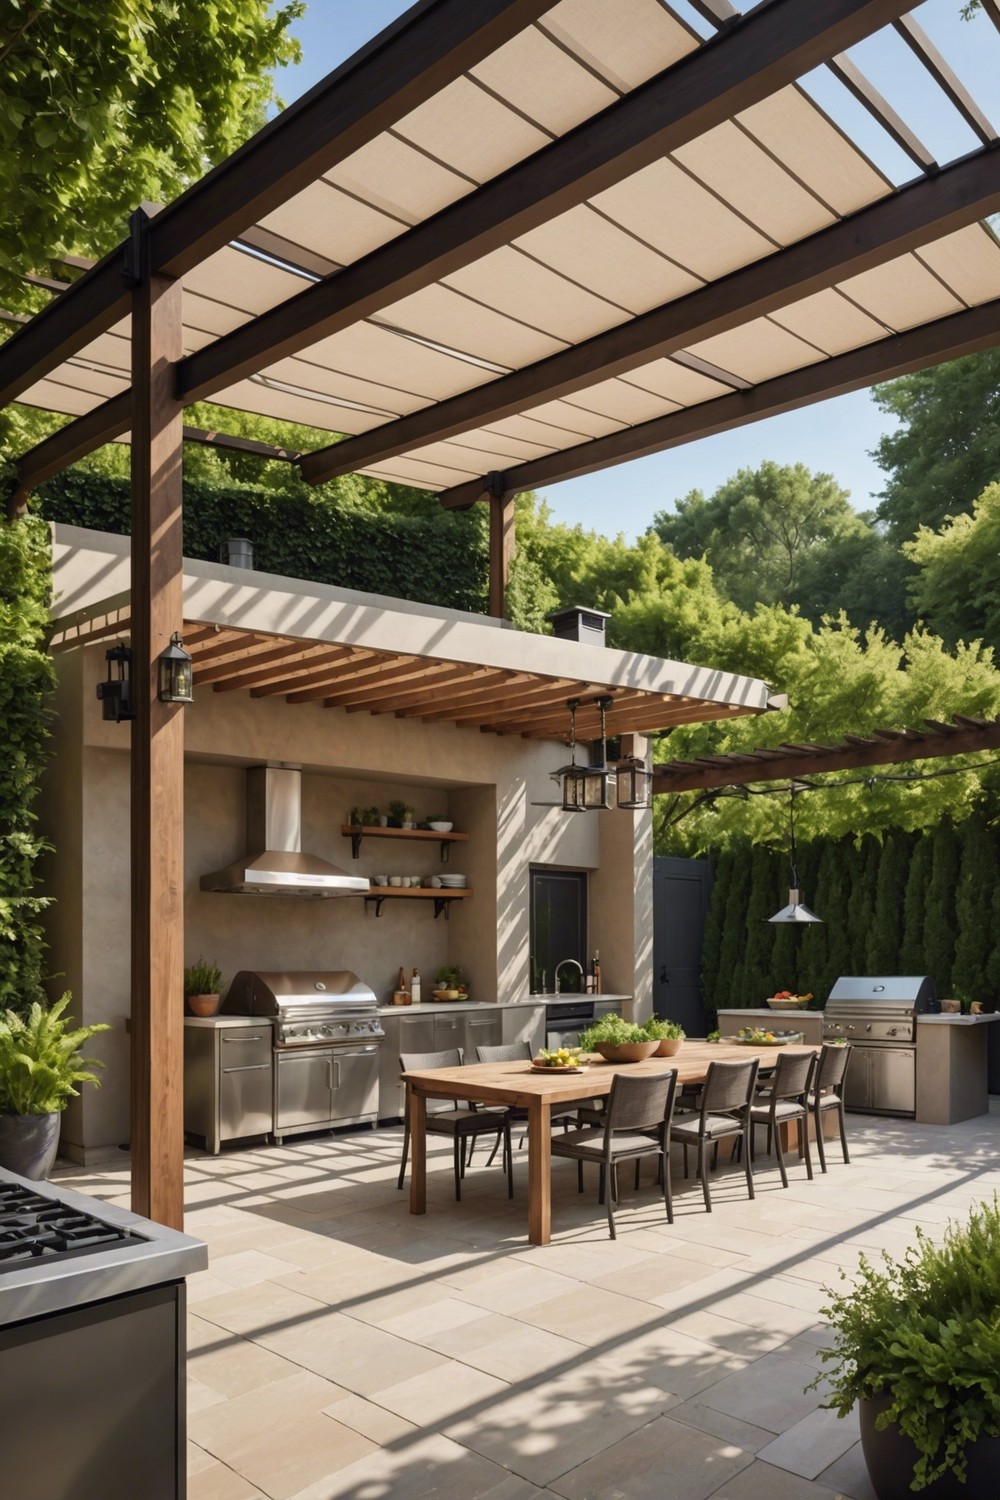 Pergola with Awnings and Outdoor Kitchen